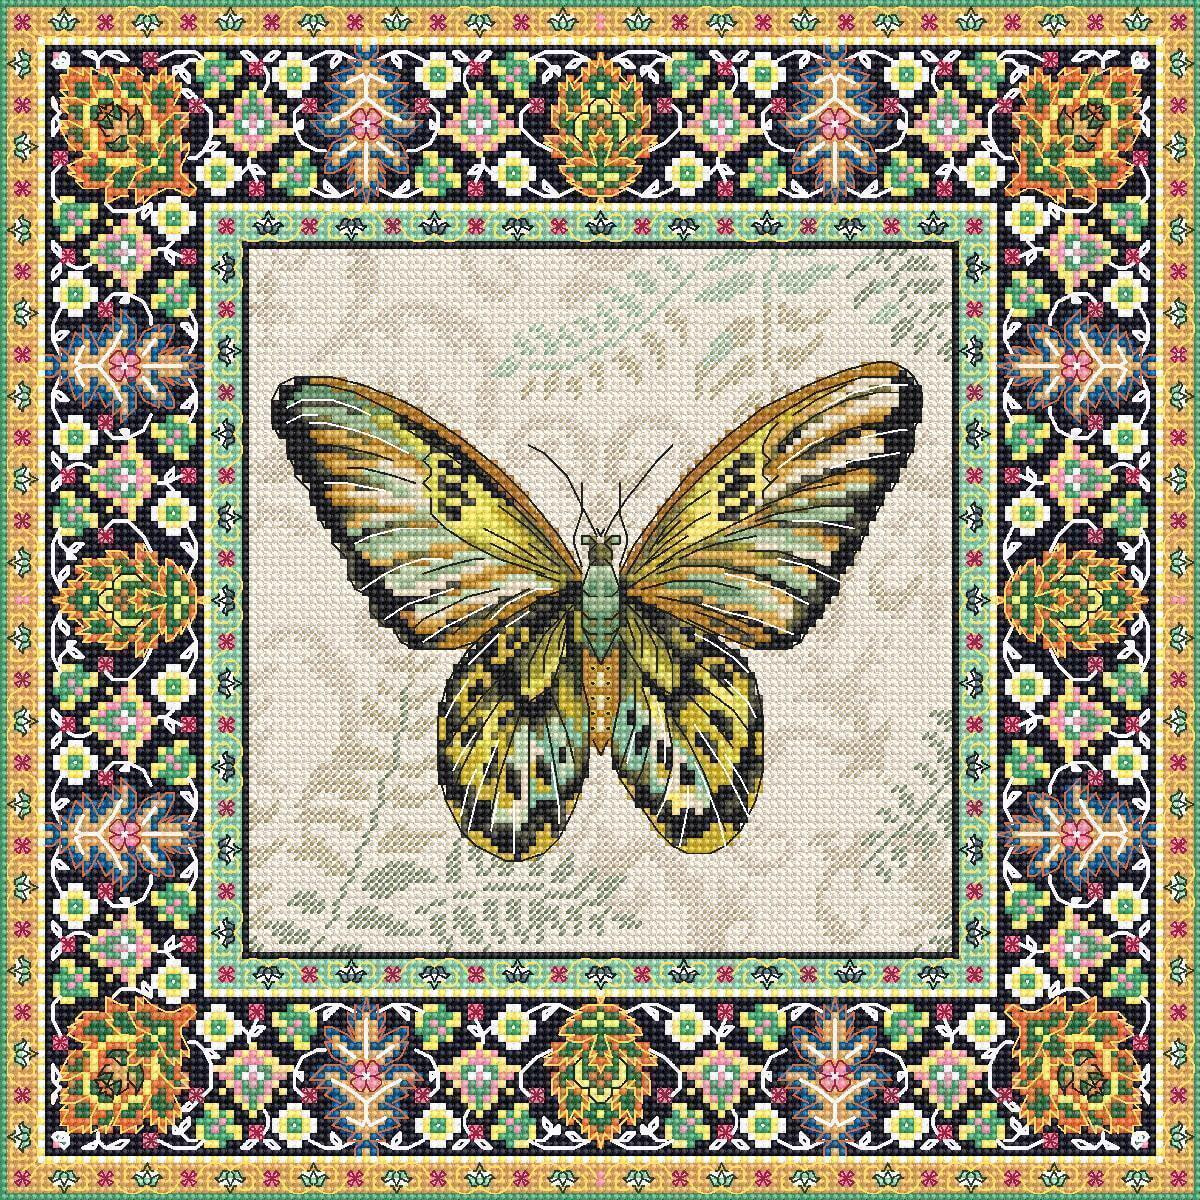 A colorful tapestry, made with intricate Letistitch...